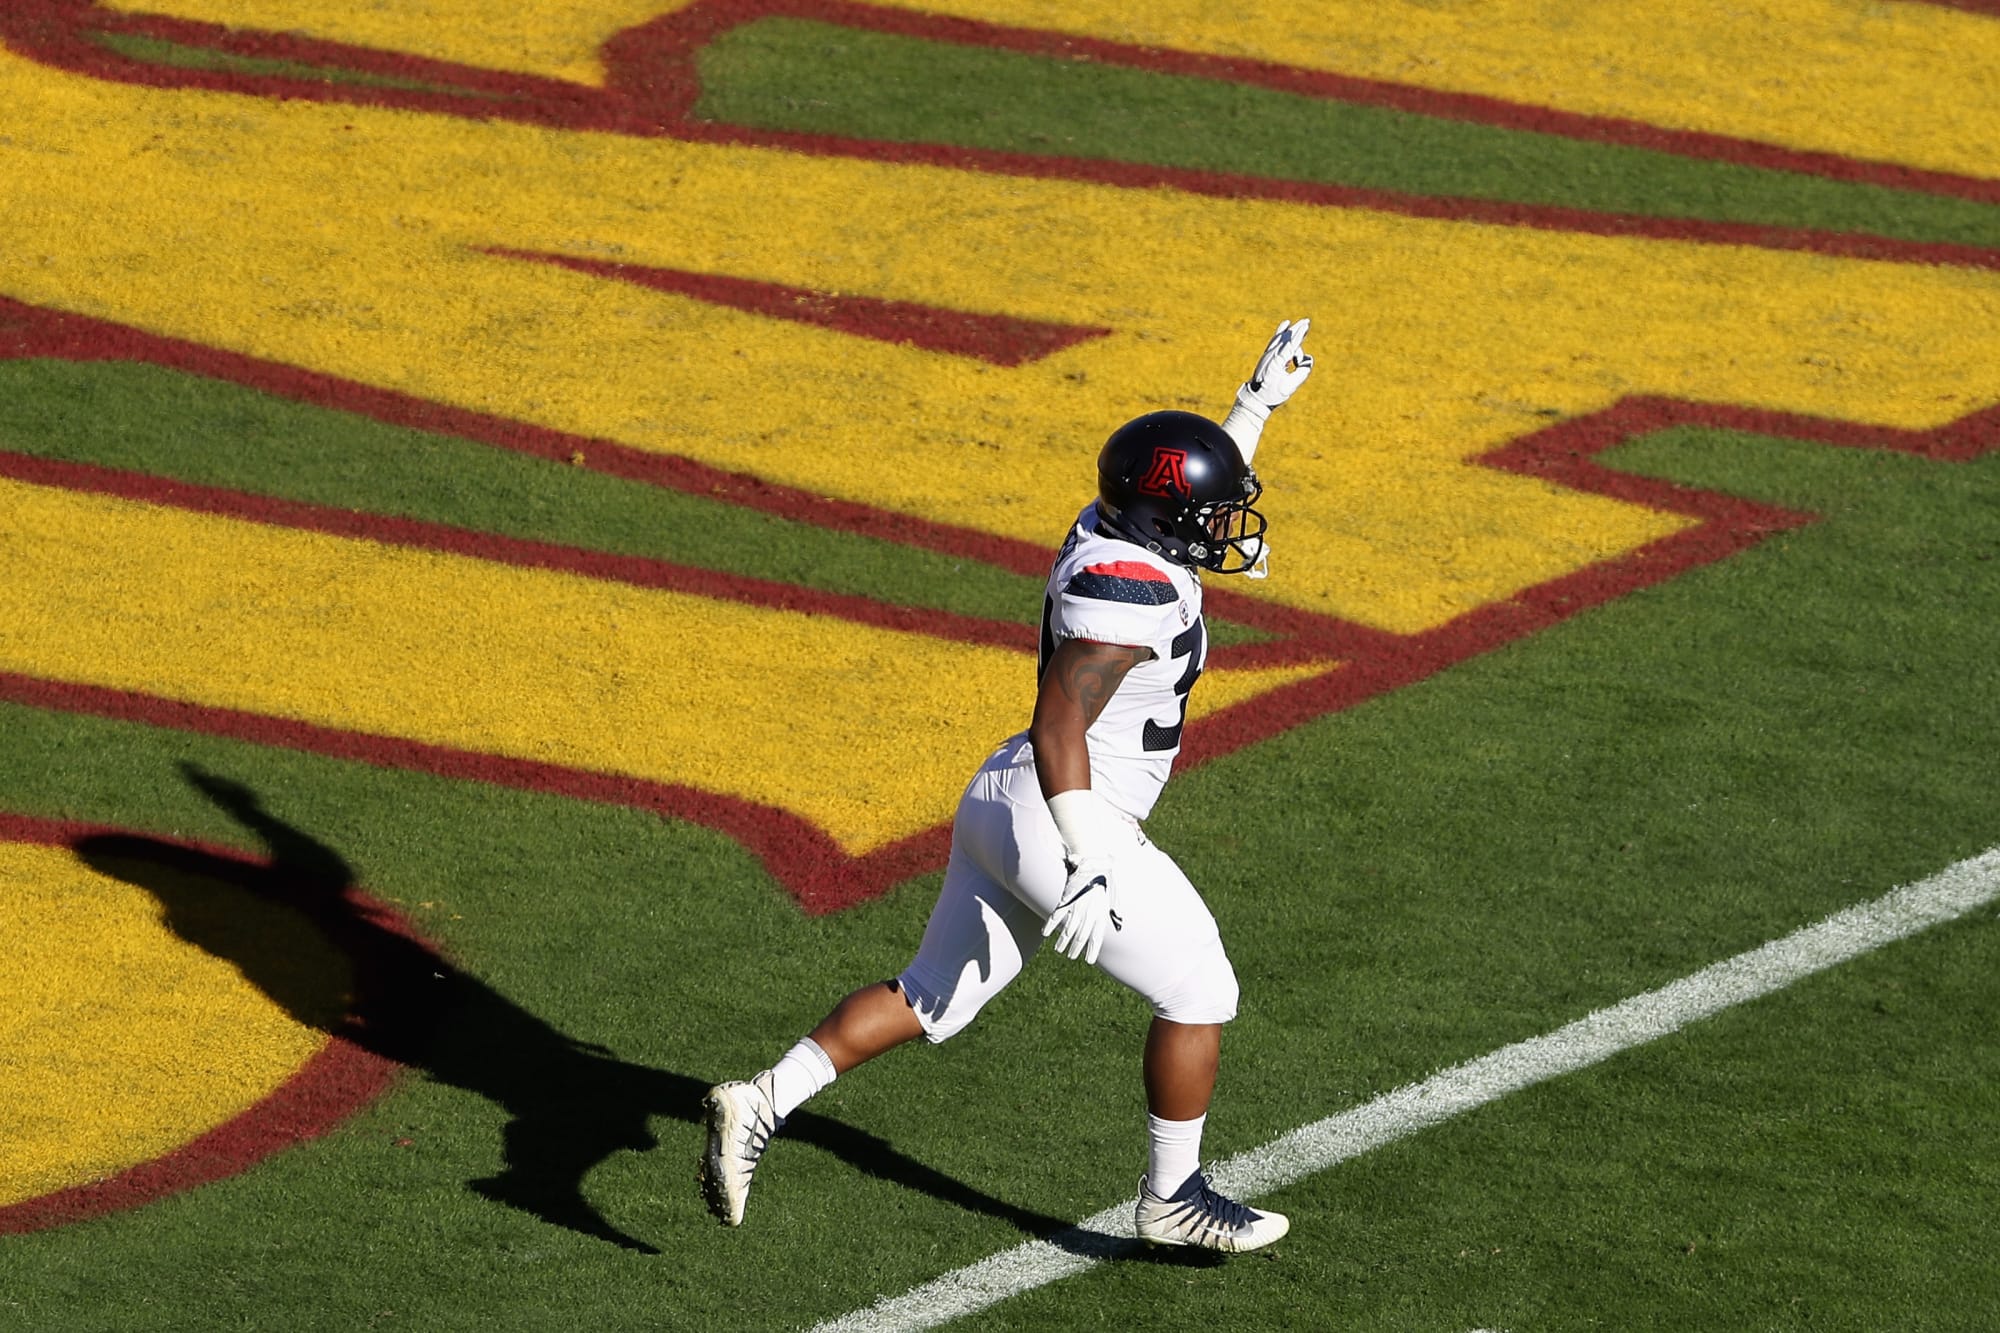 Kickoff time for Territorial Cup game has been announced